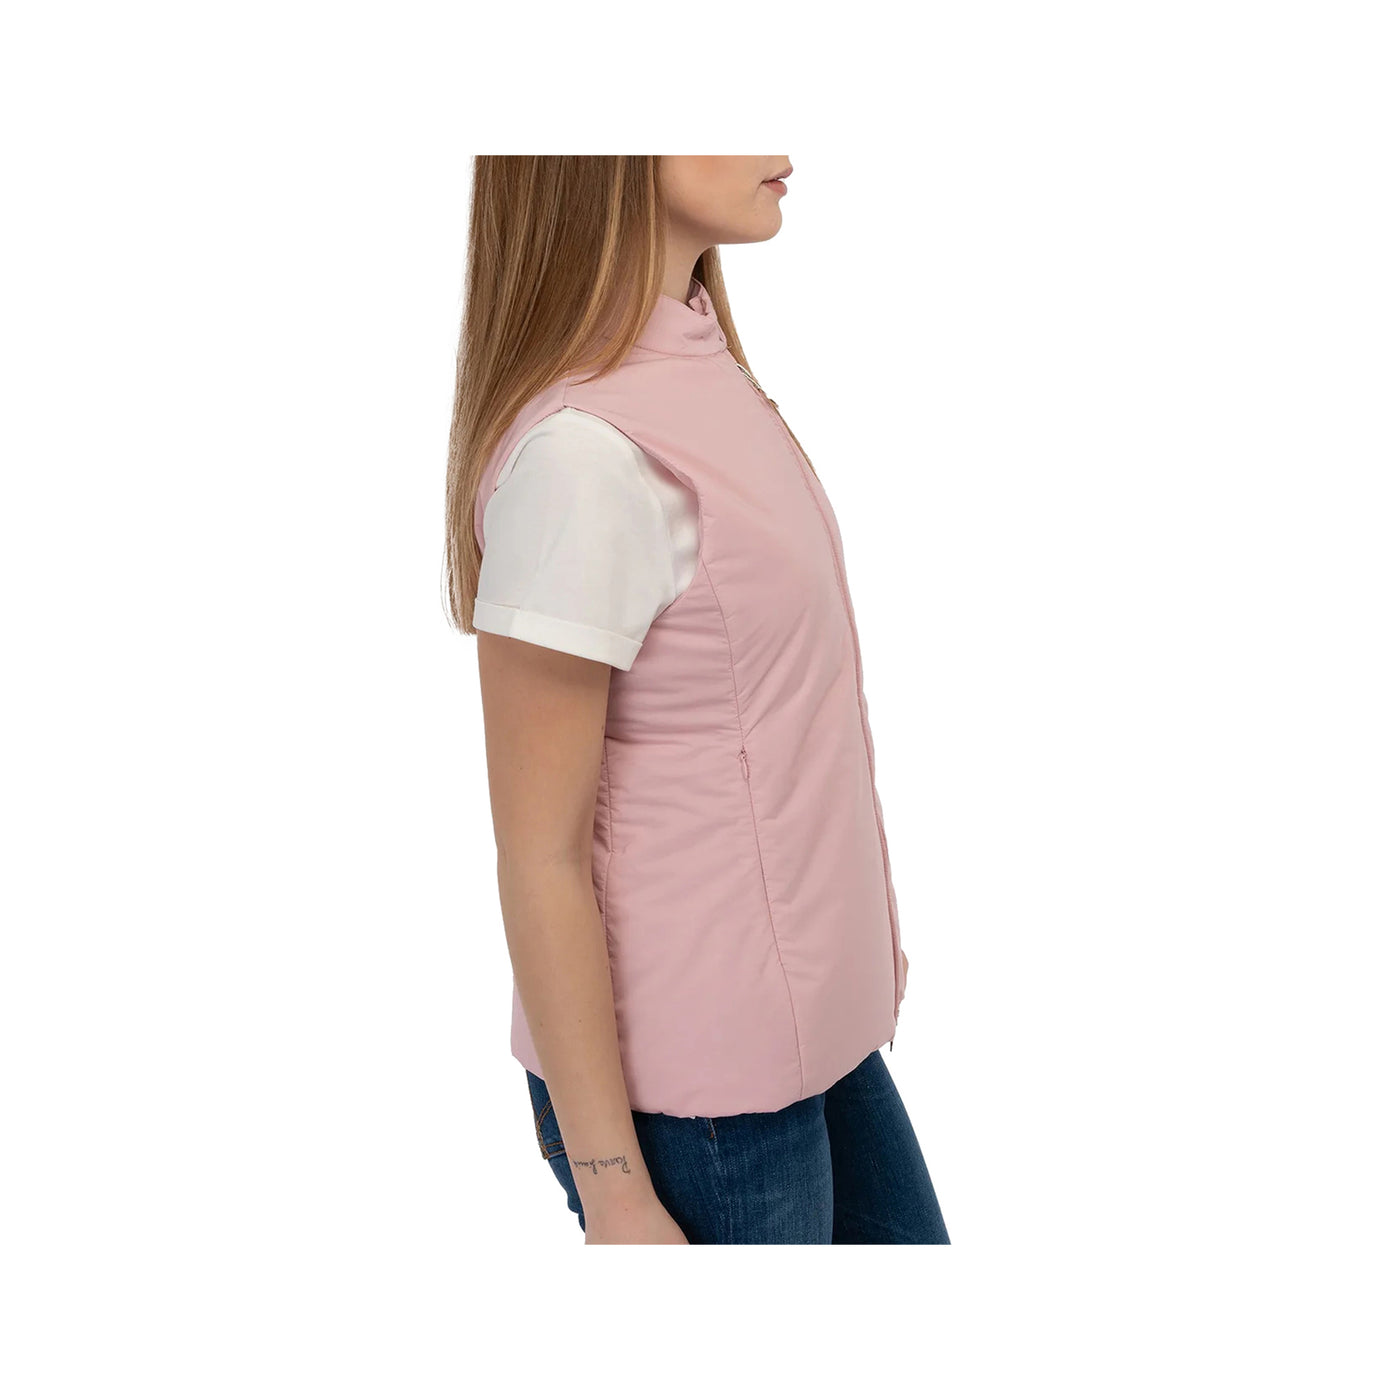 Women's waistcoat with collar with two buttons